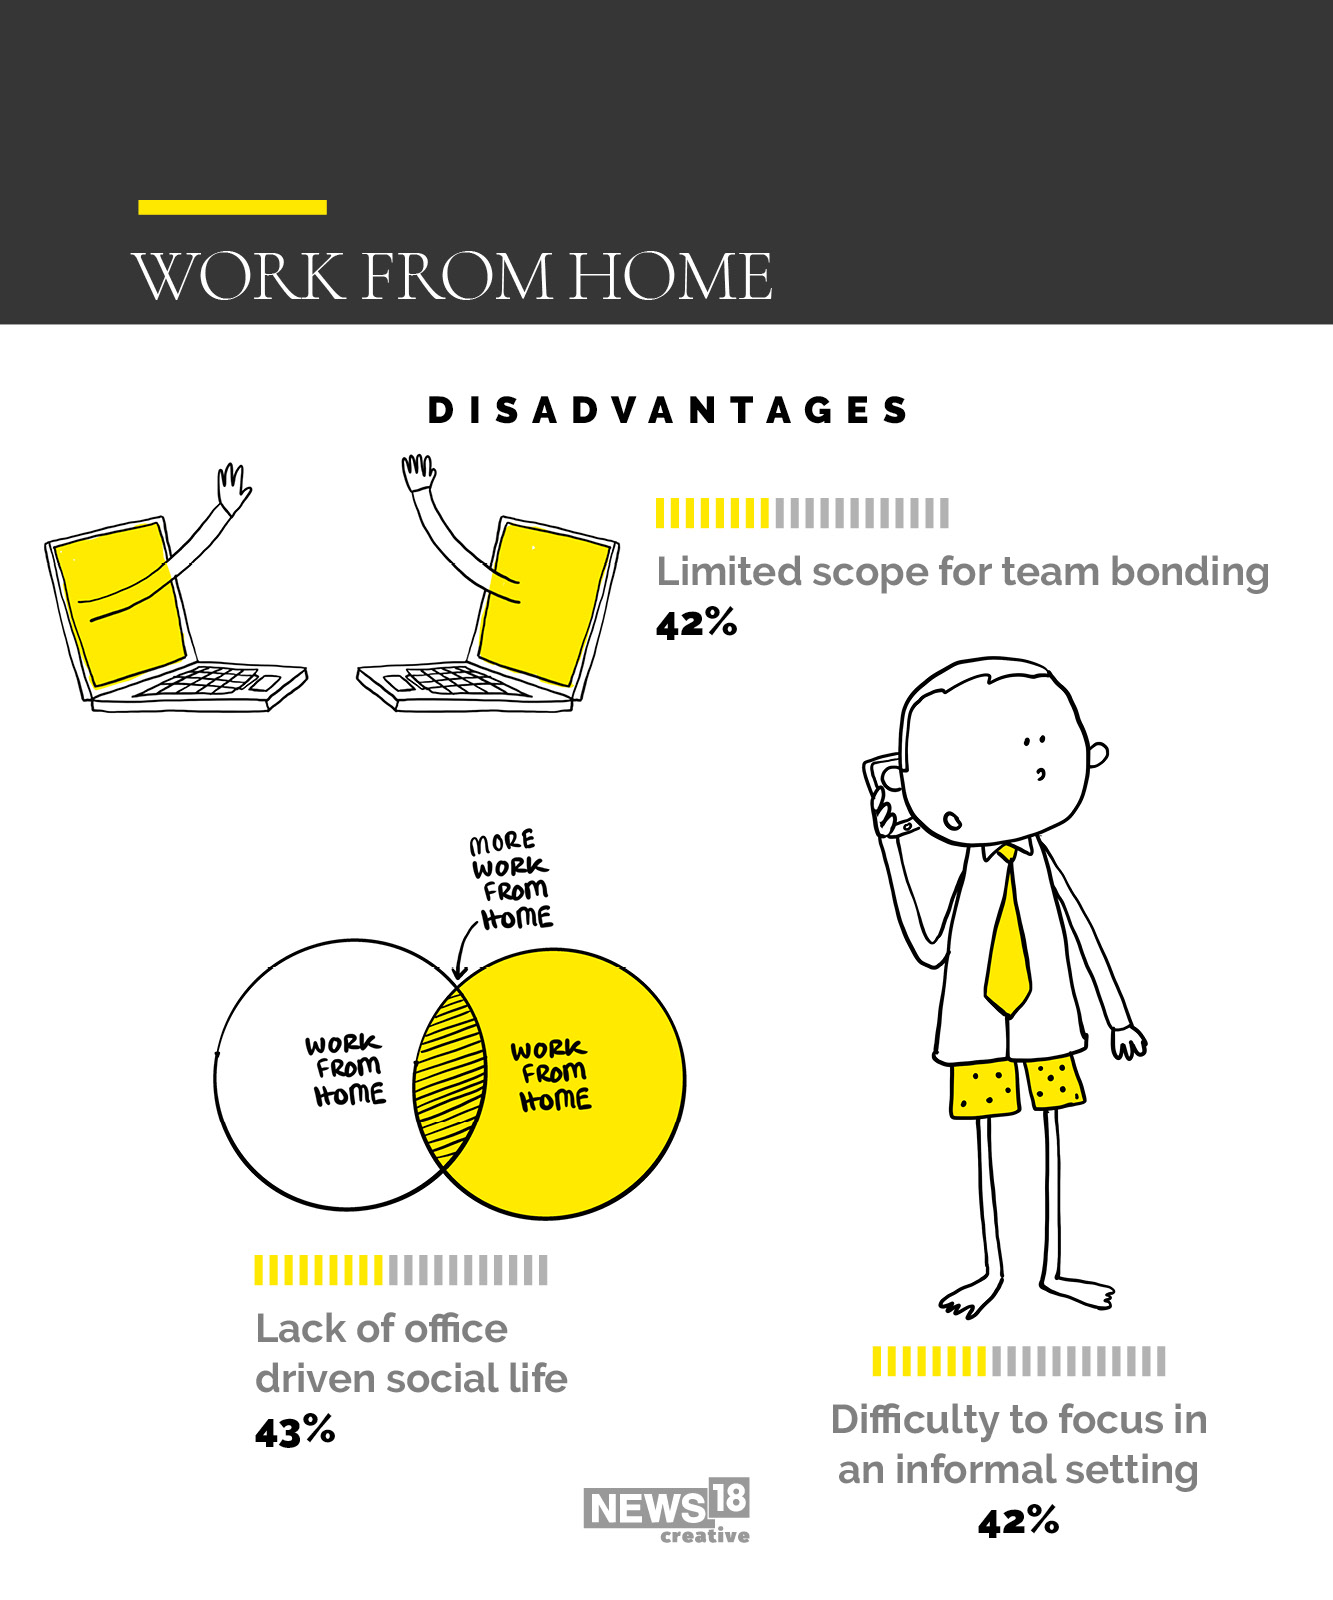 Homesick for the office? You're not the only one